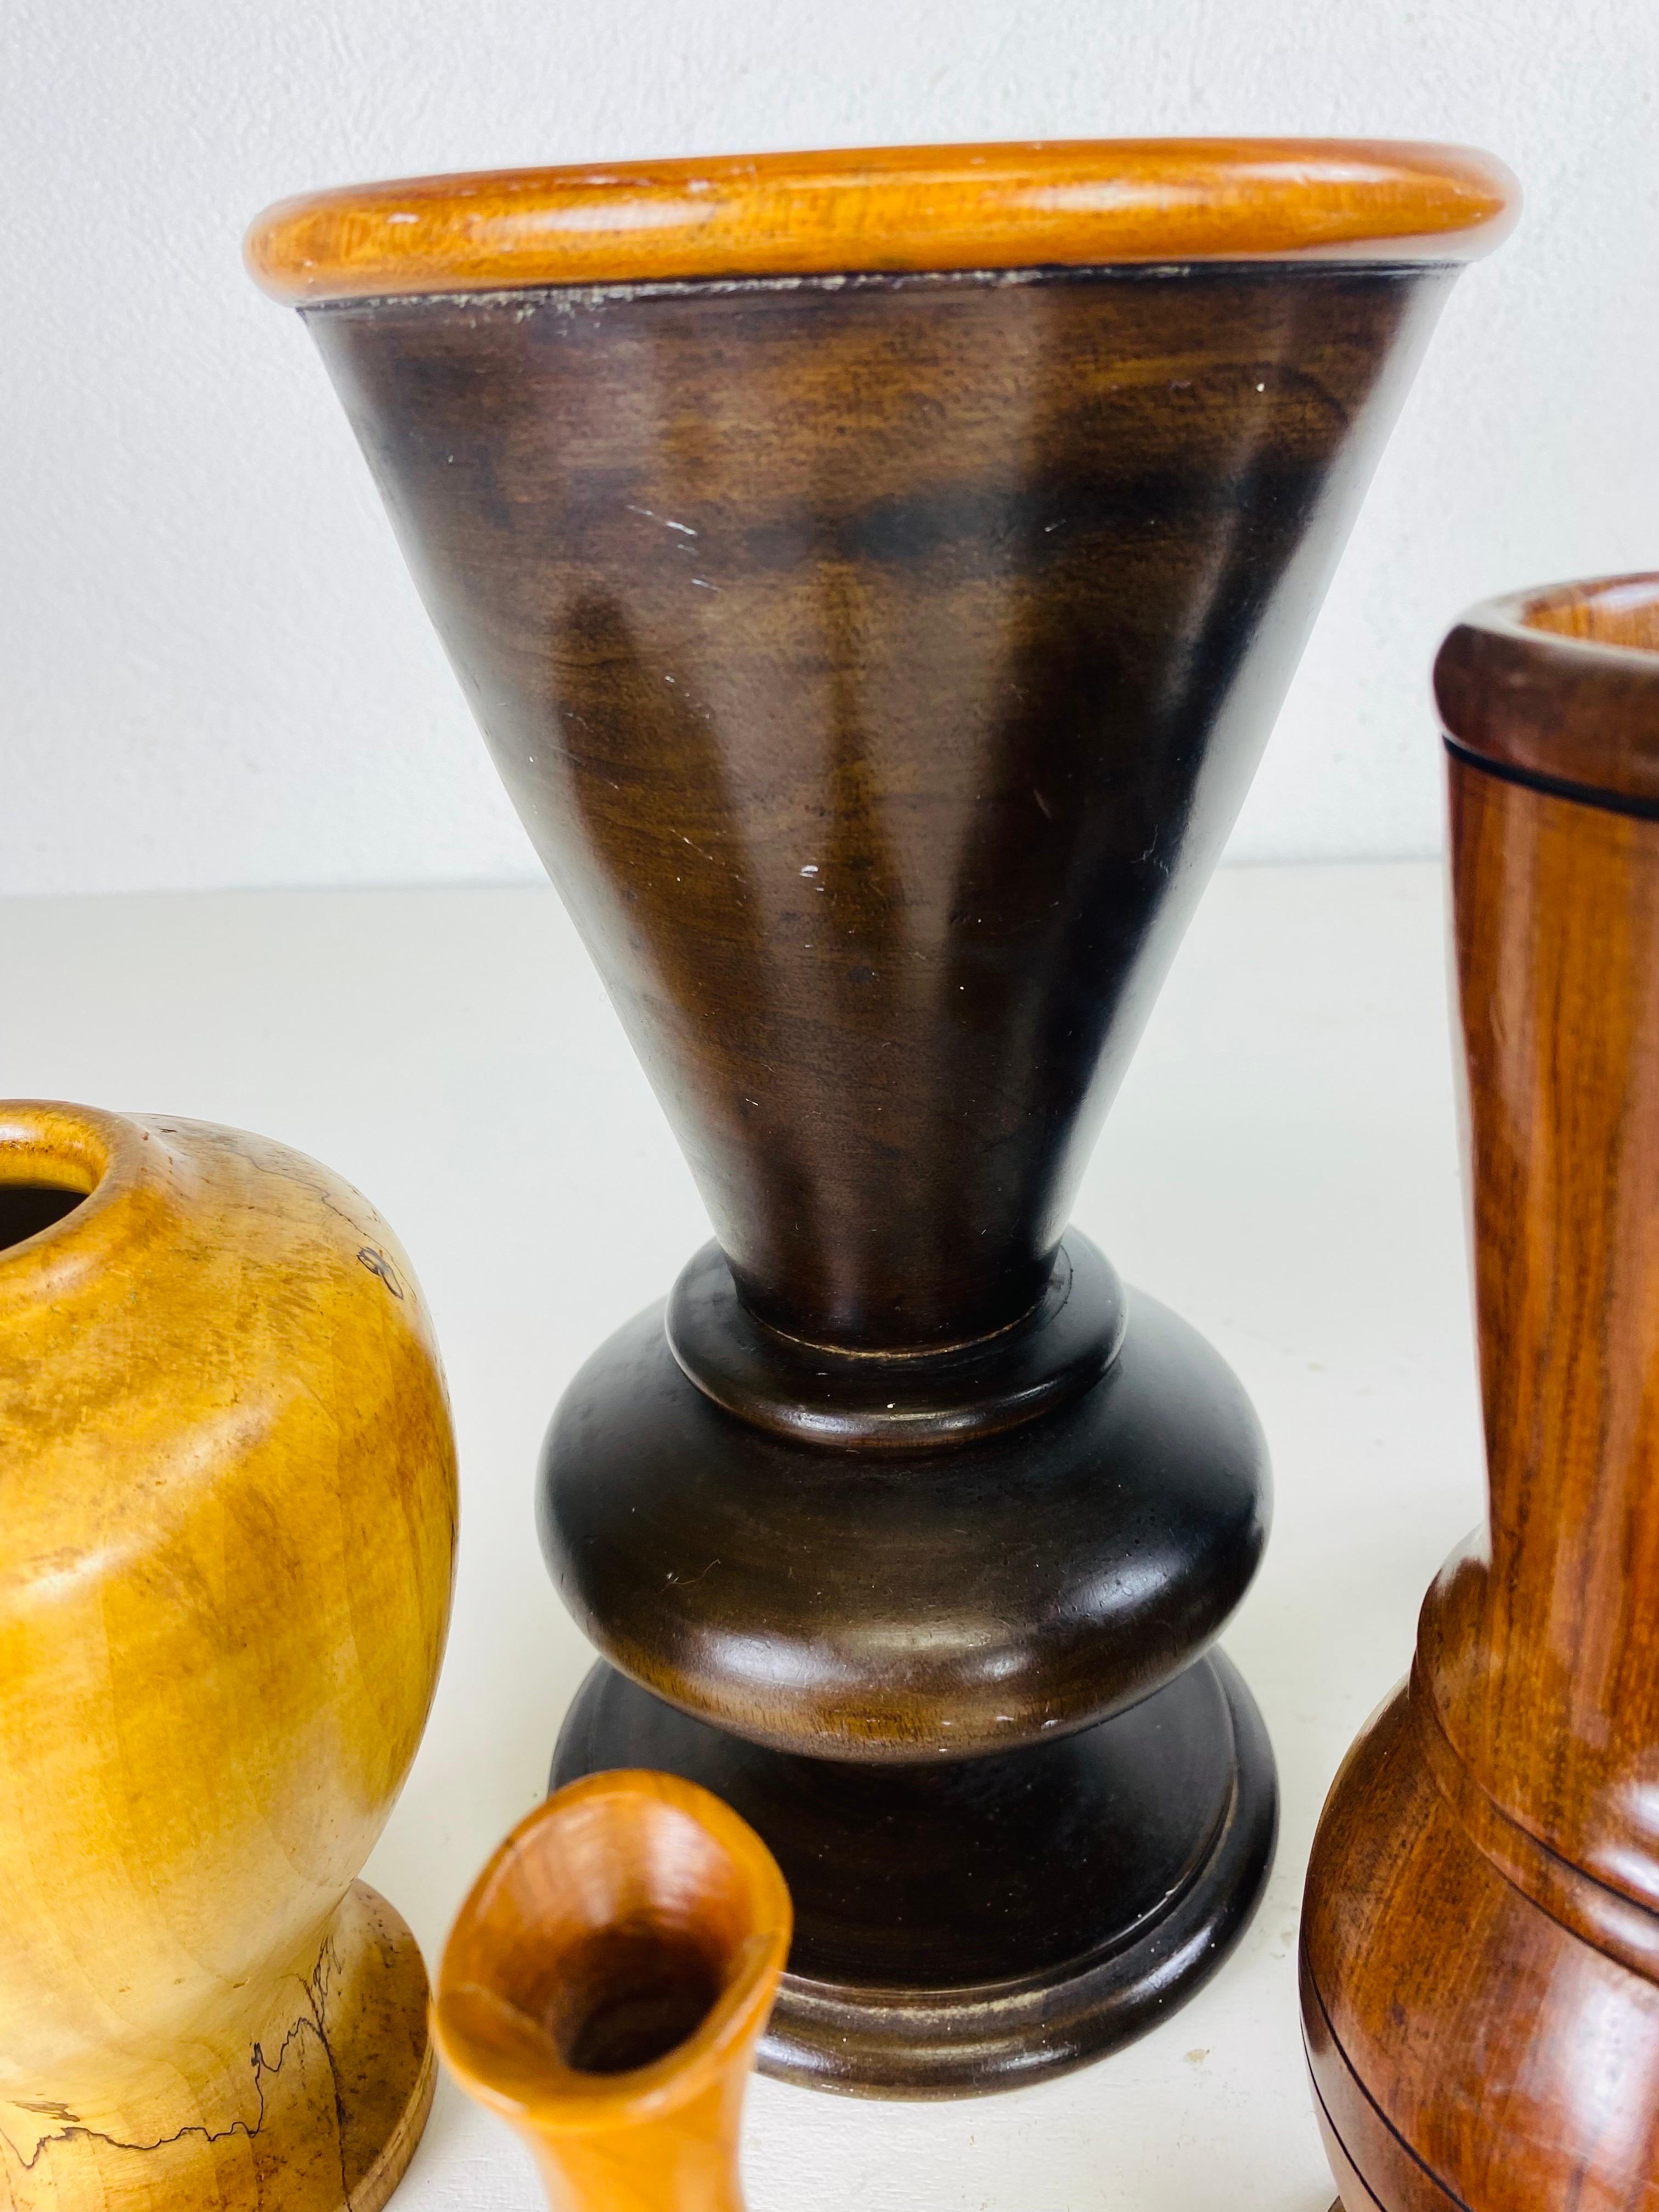 This is a complementary collection of mid century hand turned wooden vessels. Please note the measurements for these pieces are from left to right starting with the blonde vase on the far left measures 4 1/2 x 4 1/2 x 7 1/2 tall. The two large